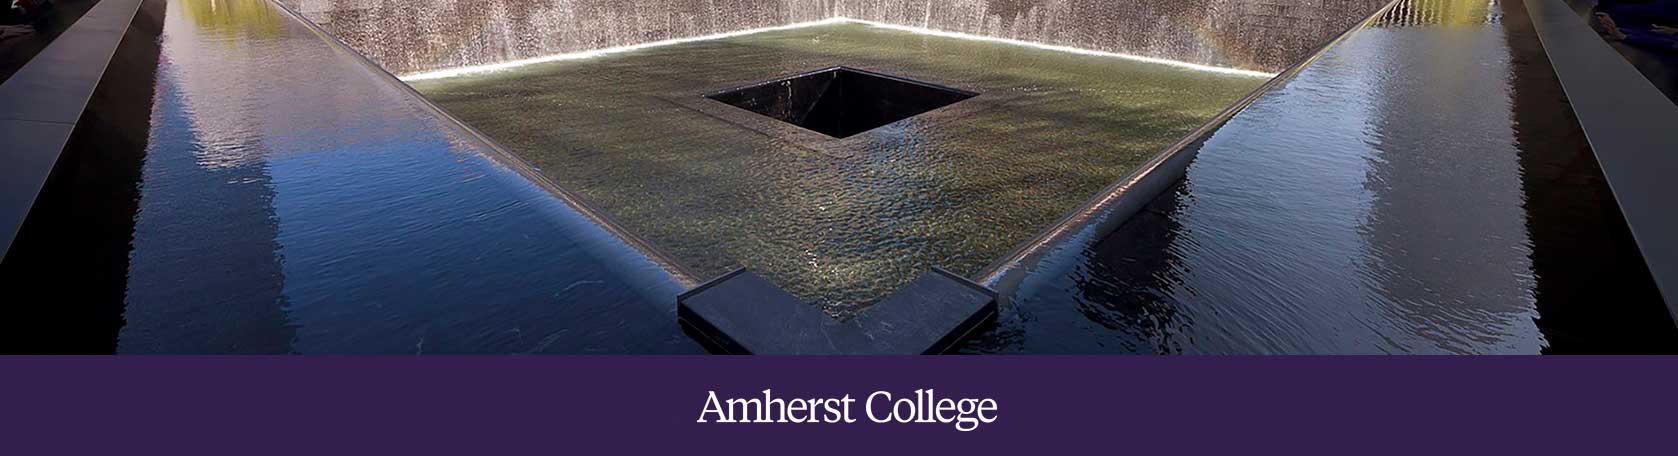 south pool memorial in new york city for victims of september 11